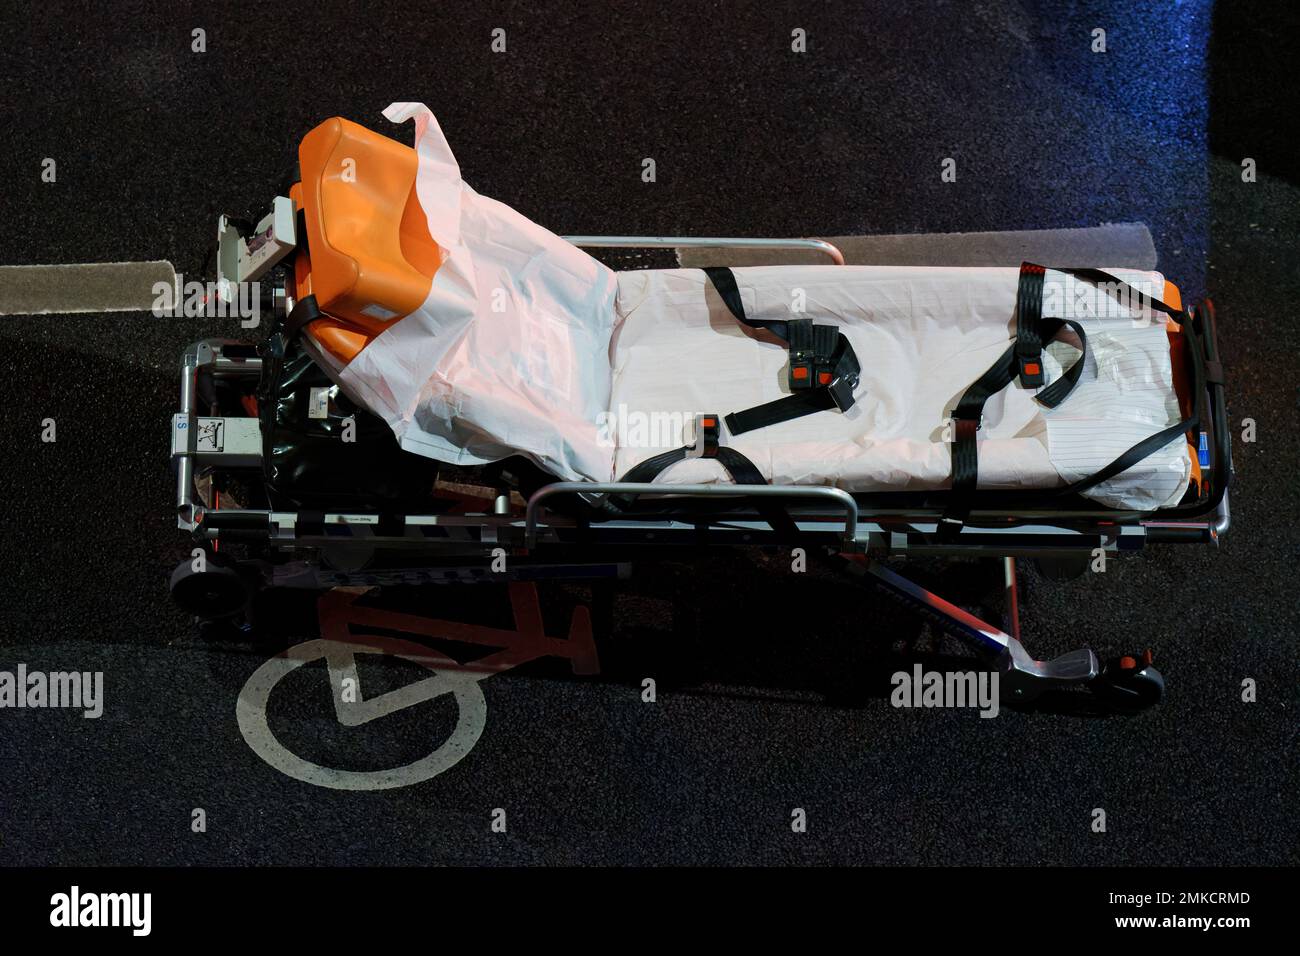 an empty stretcher of an ambulance stands at night on a street with a bicycle lane Stock Photo